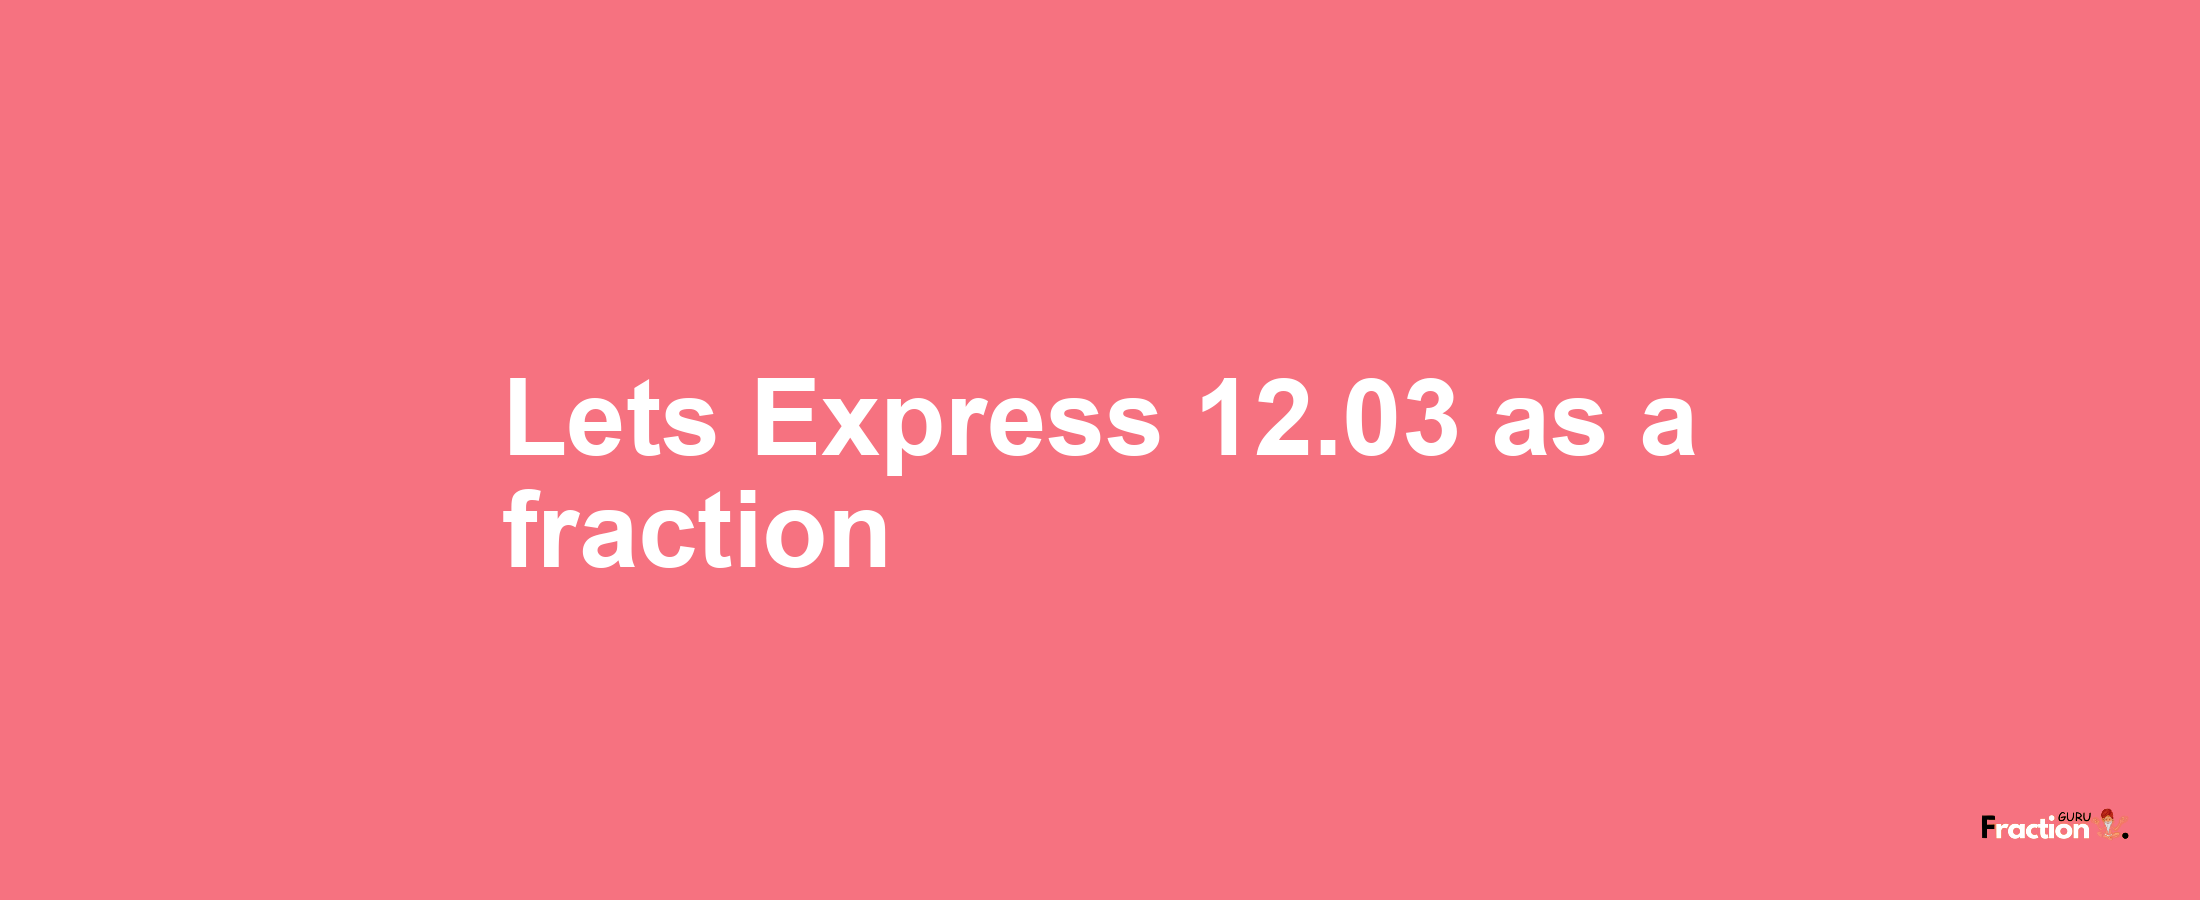 Lets Express 12.03 as afraction